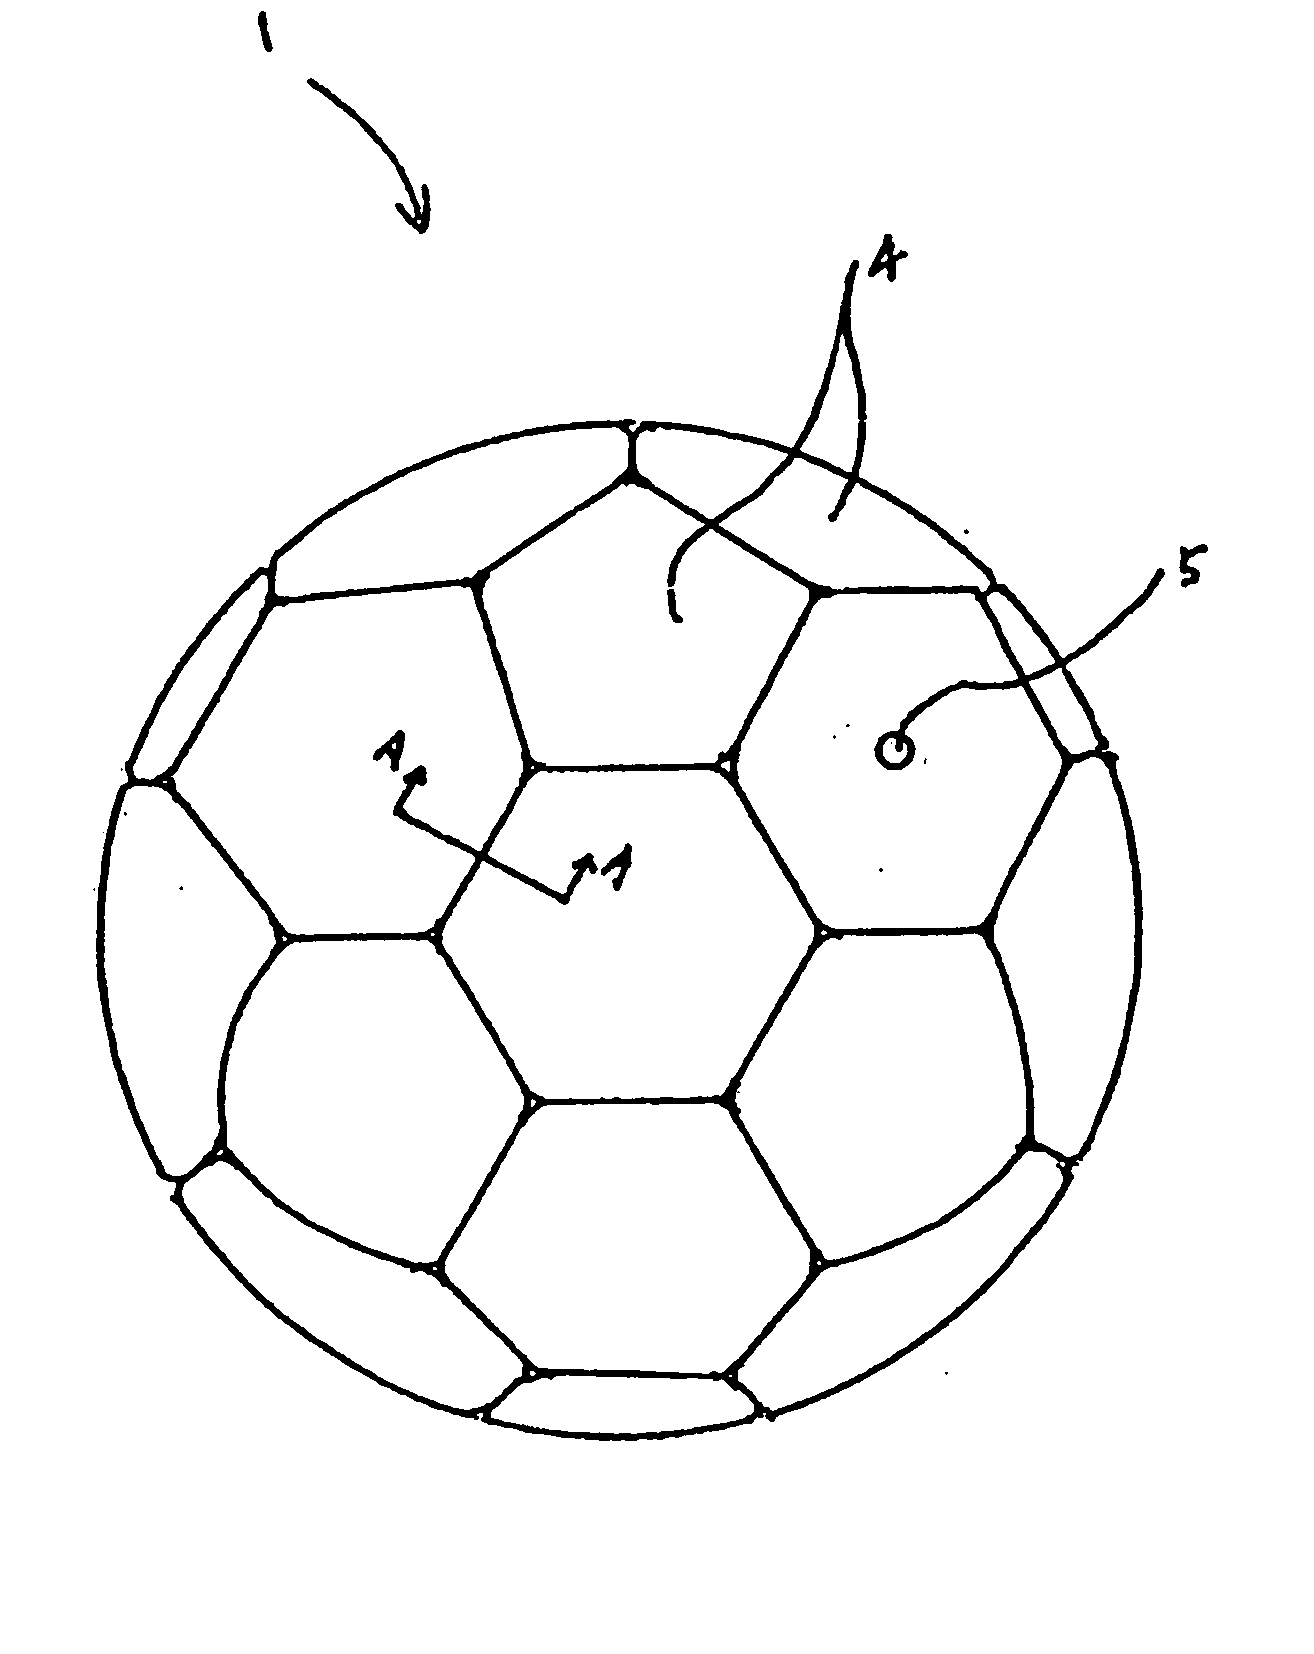 Panel of a ball for a ball game, a ball, and methods of making the same